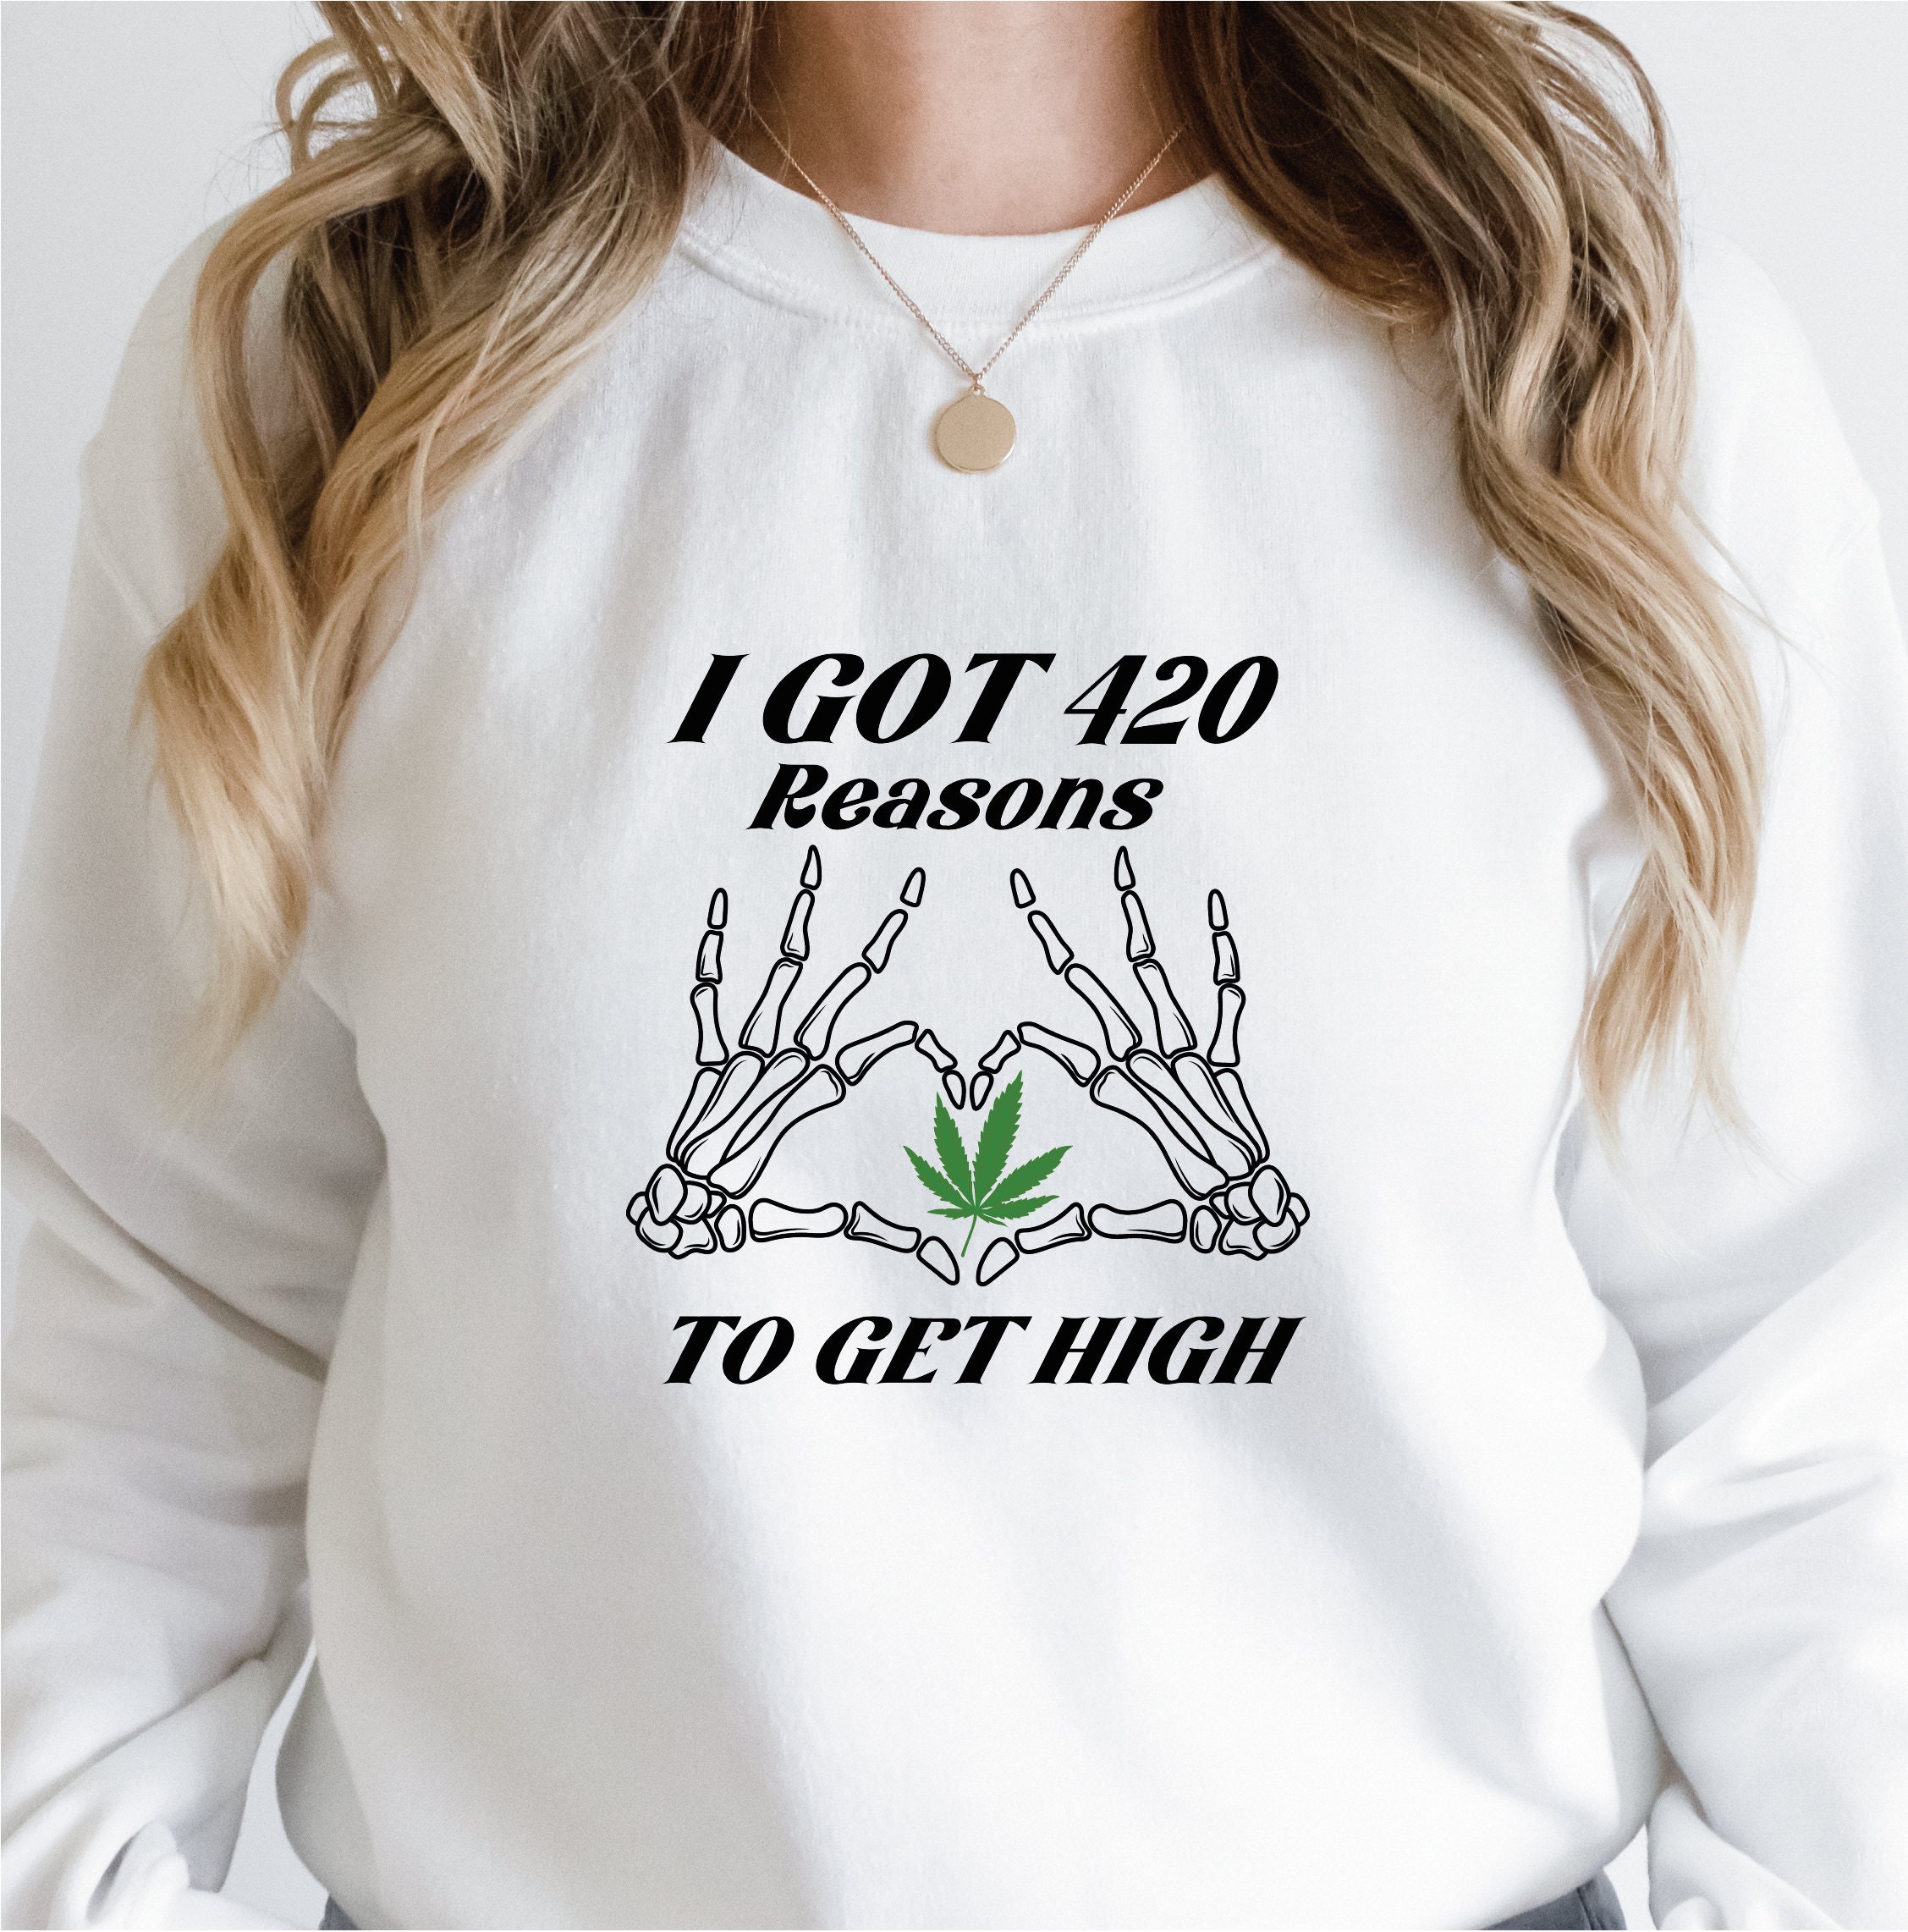 Top 5 best selling sweatshirts from Weed-hoodie store for young people